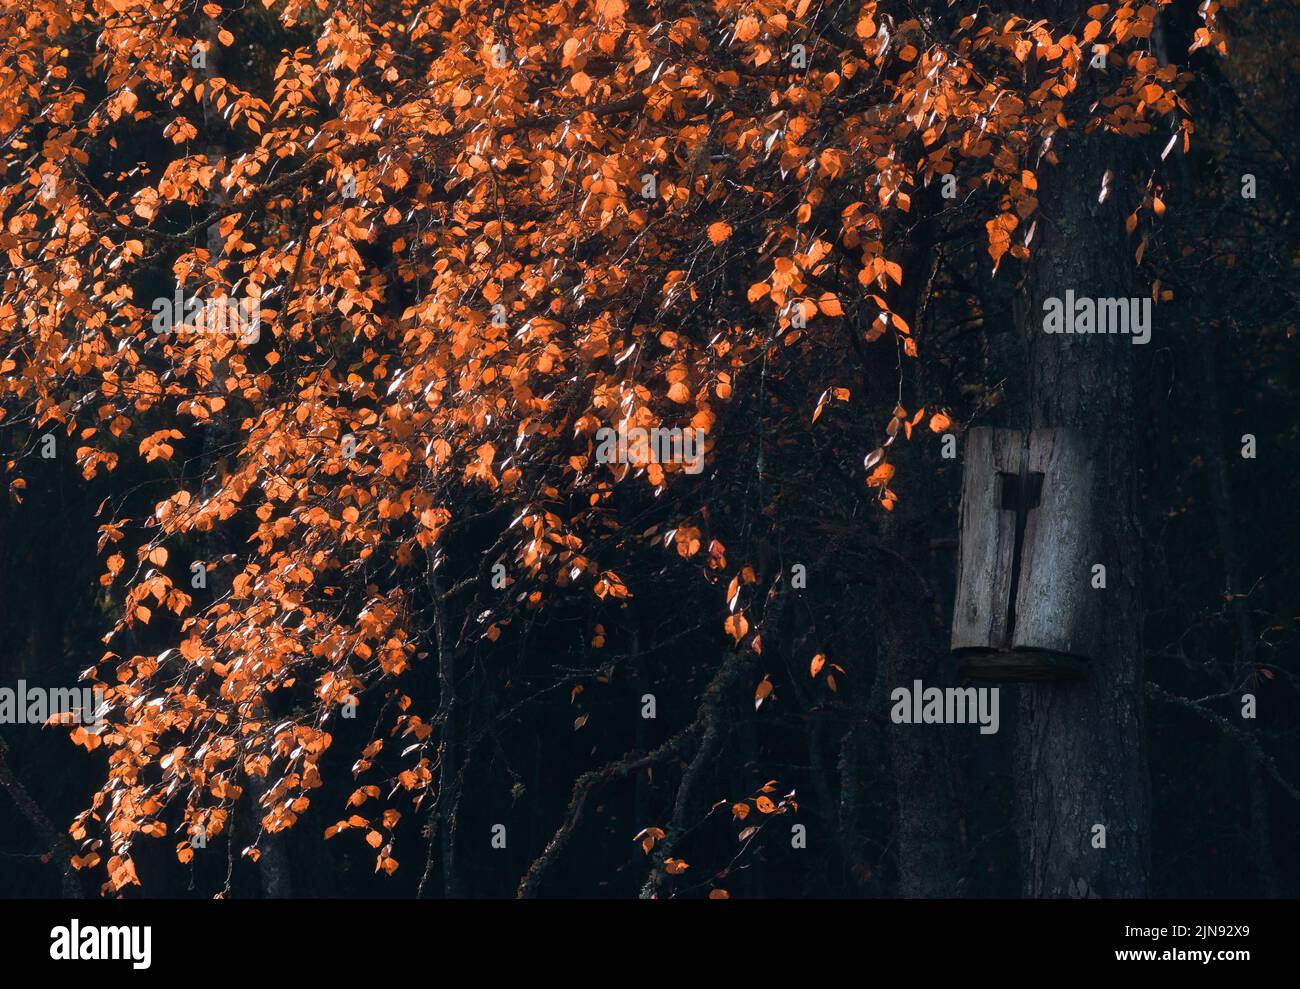 Fall colour leaves with birdhouse at autumn evening Stock Photo